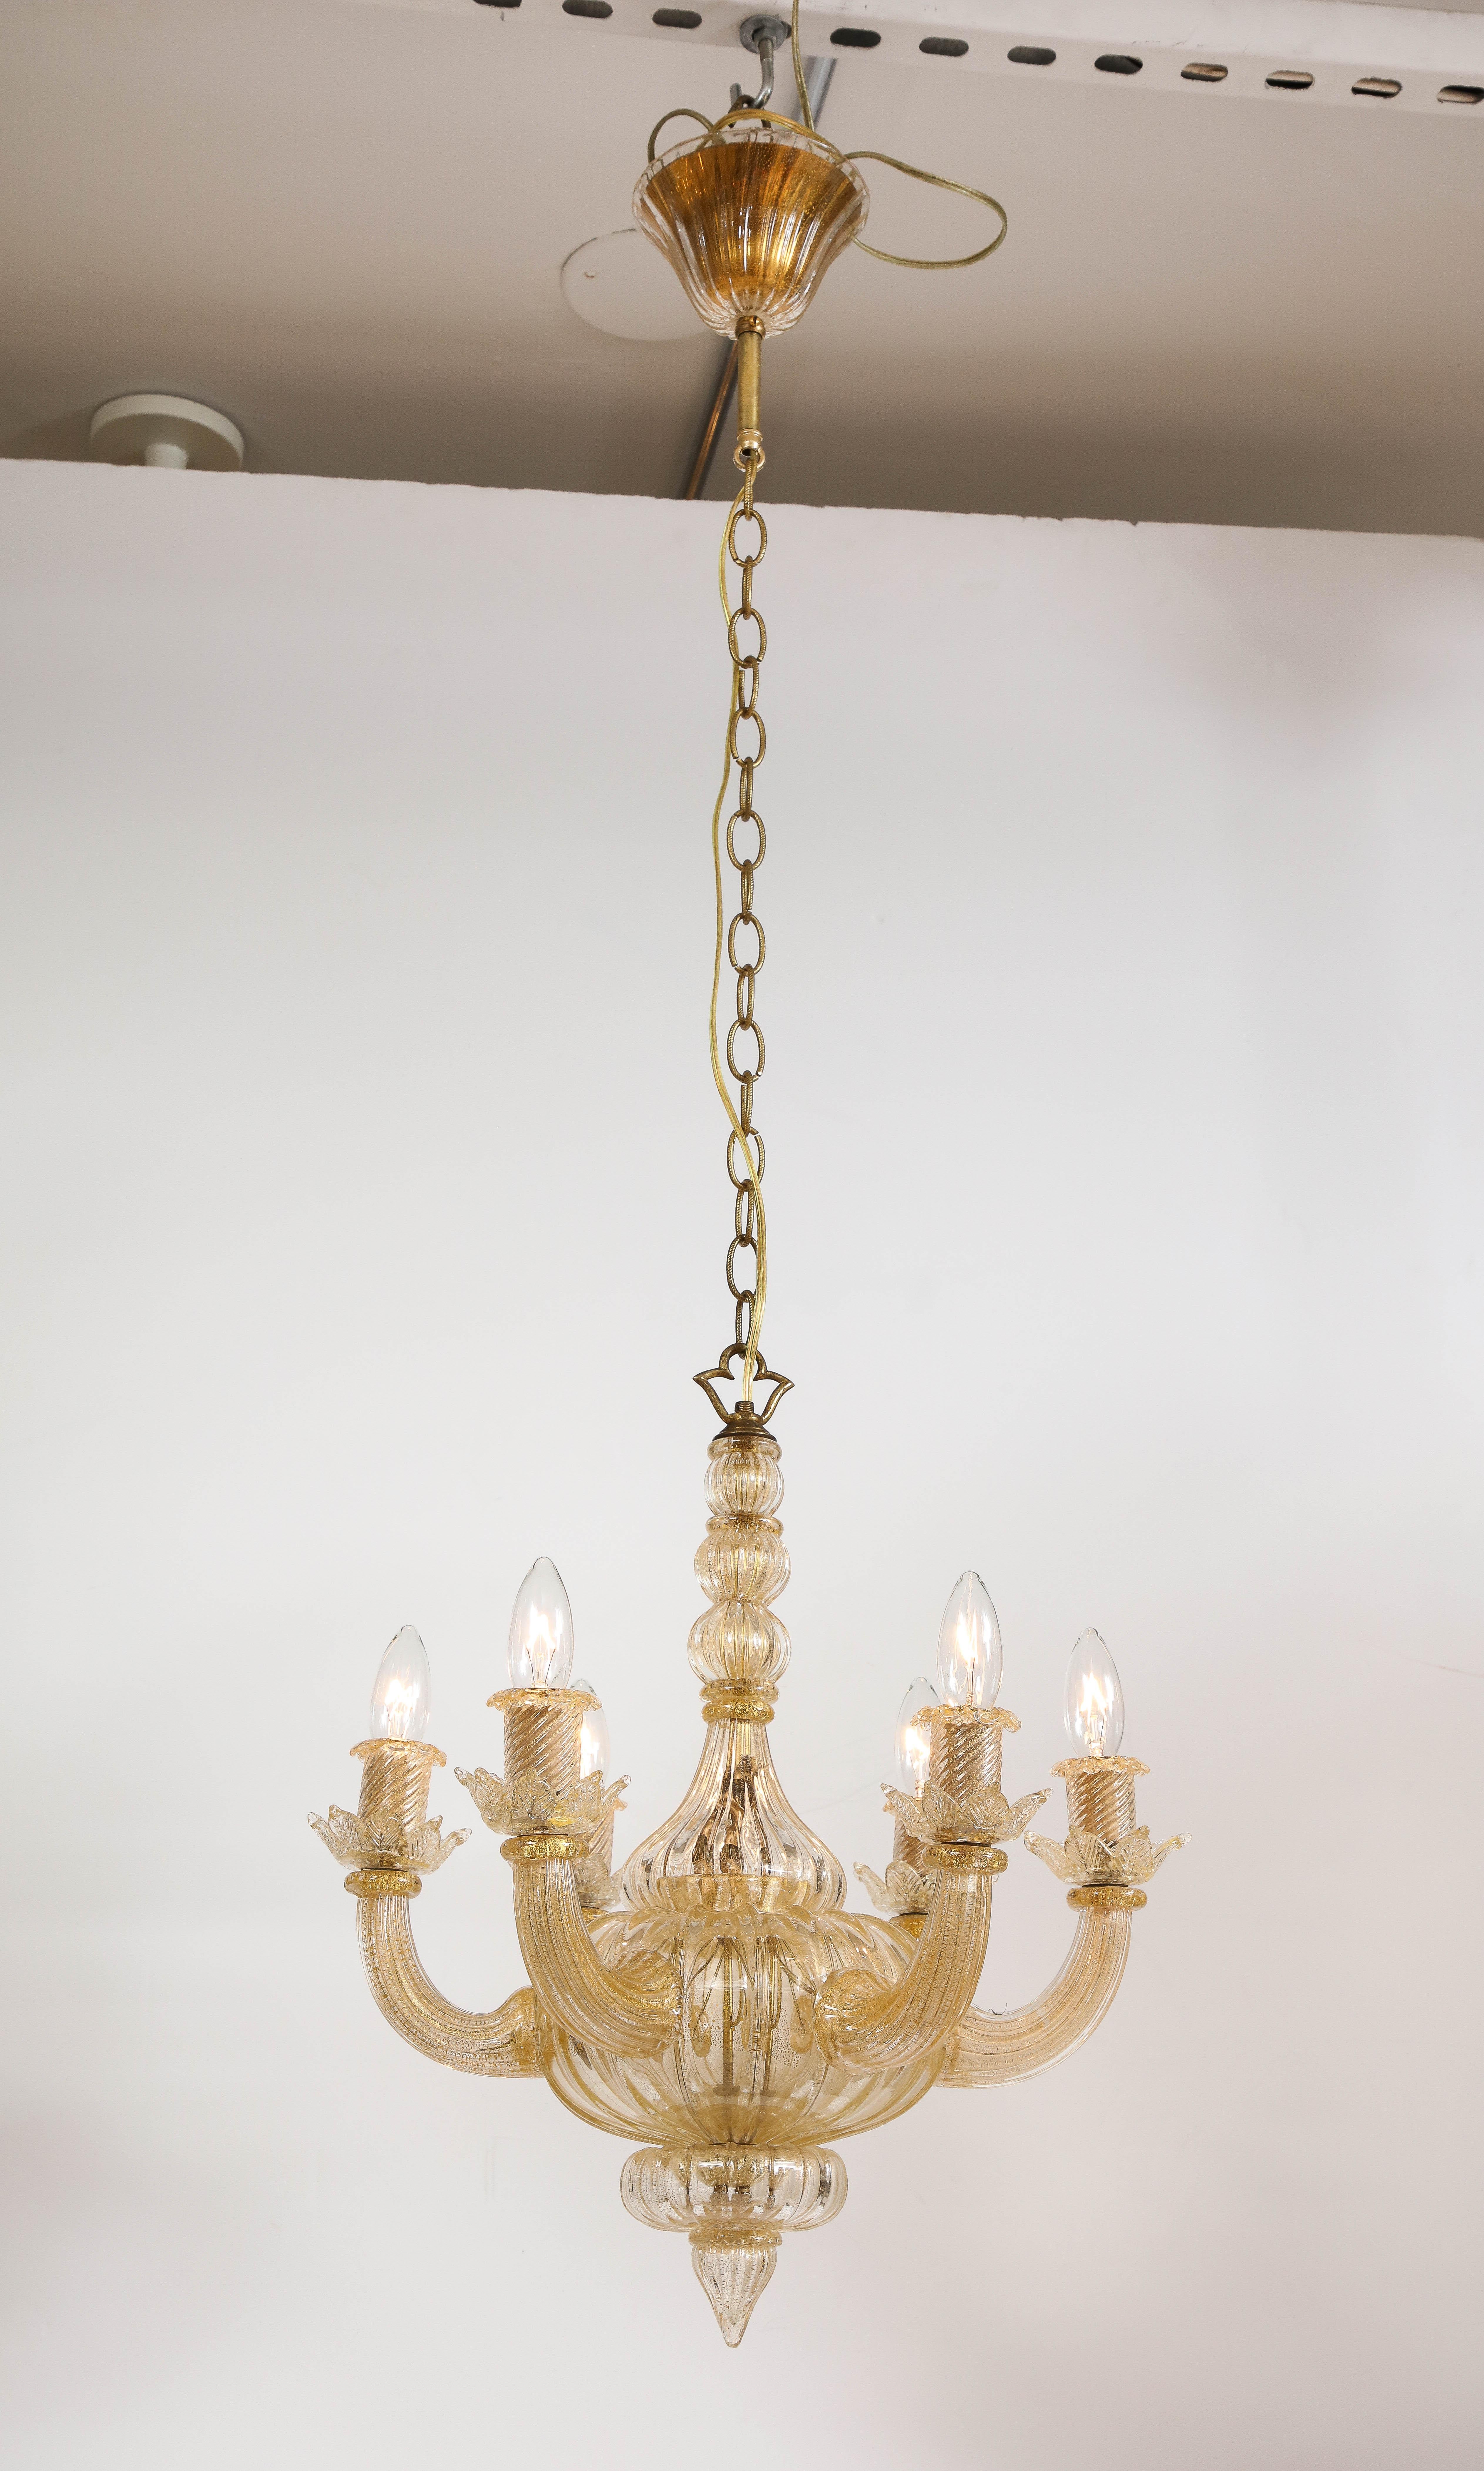 A midcentury hand blown Murano chandelier in semi-opaque hand blown Murano gold glass in an elegant neo-classical design with six curved upward arms ending with glass candle holders radiating from a fluted bulbous body, newly wired for the U.S.